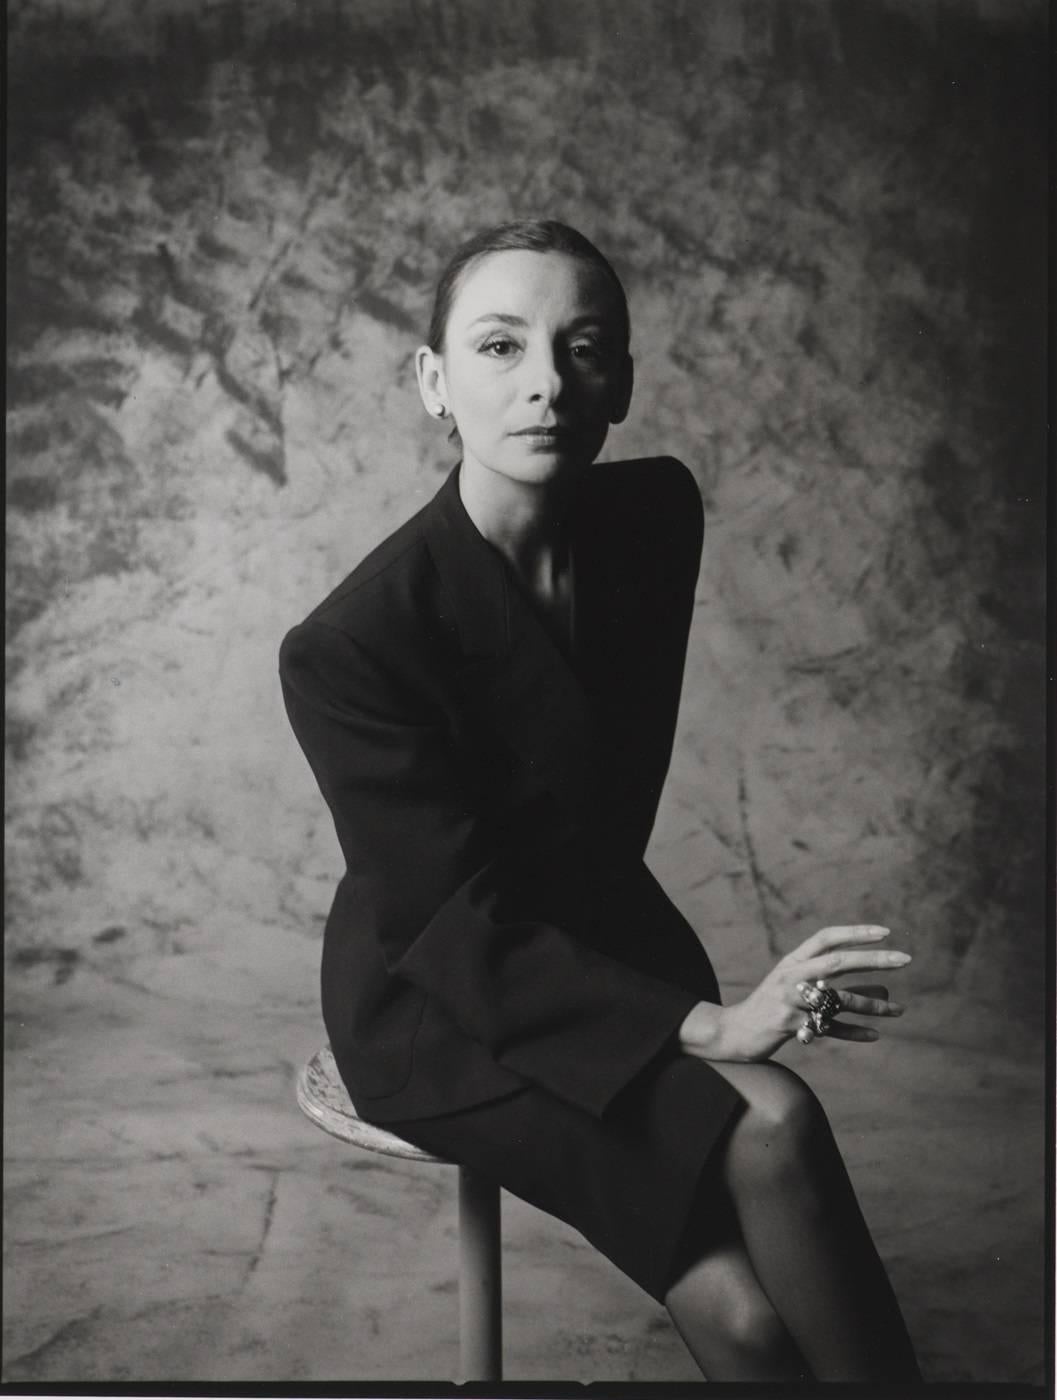 Muriel Grateau, Milano, 1984. Portrait of a woman, black and white photography - Photograph by Javier Vallhonrat